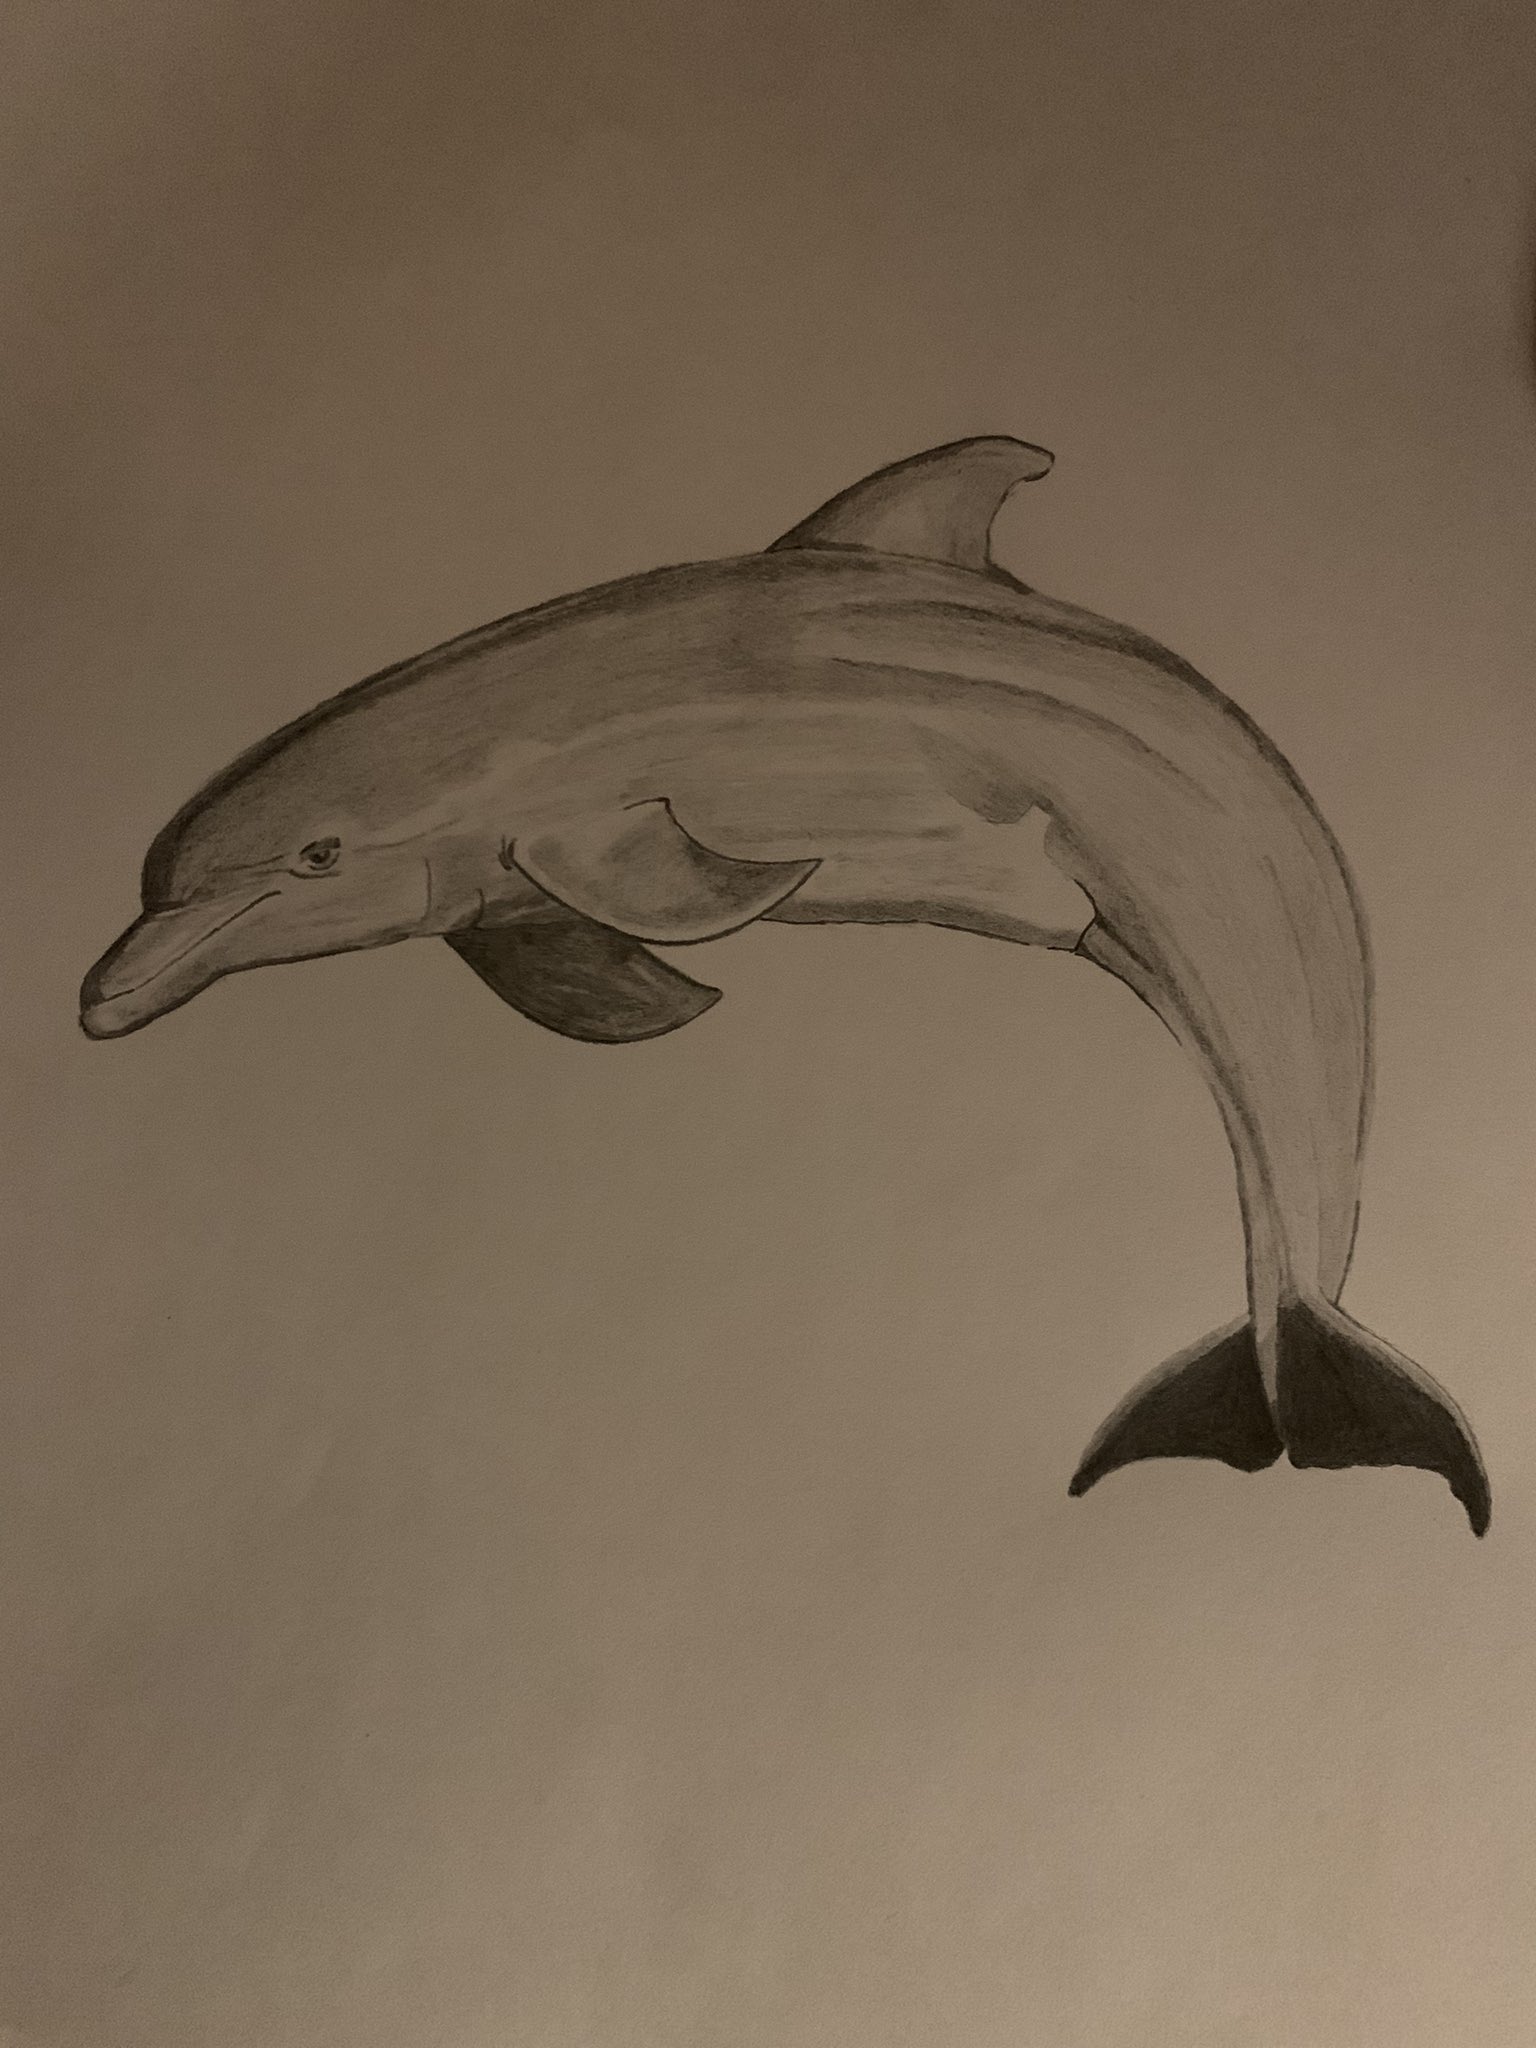 How to draw Scenery of Dolphin in Beach  Sunset Scenery Drawing with Pencil  Sketch  YouTube